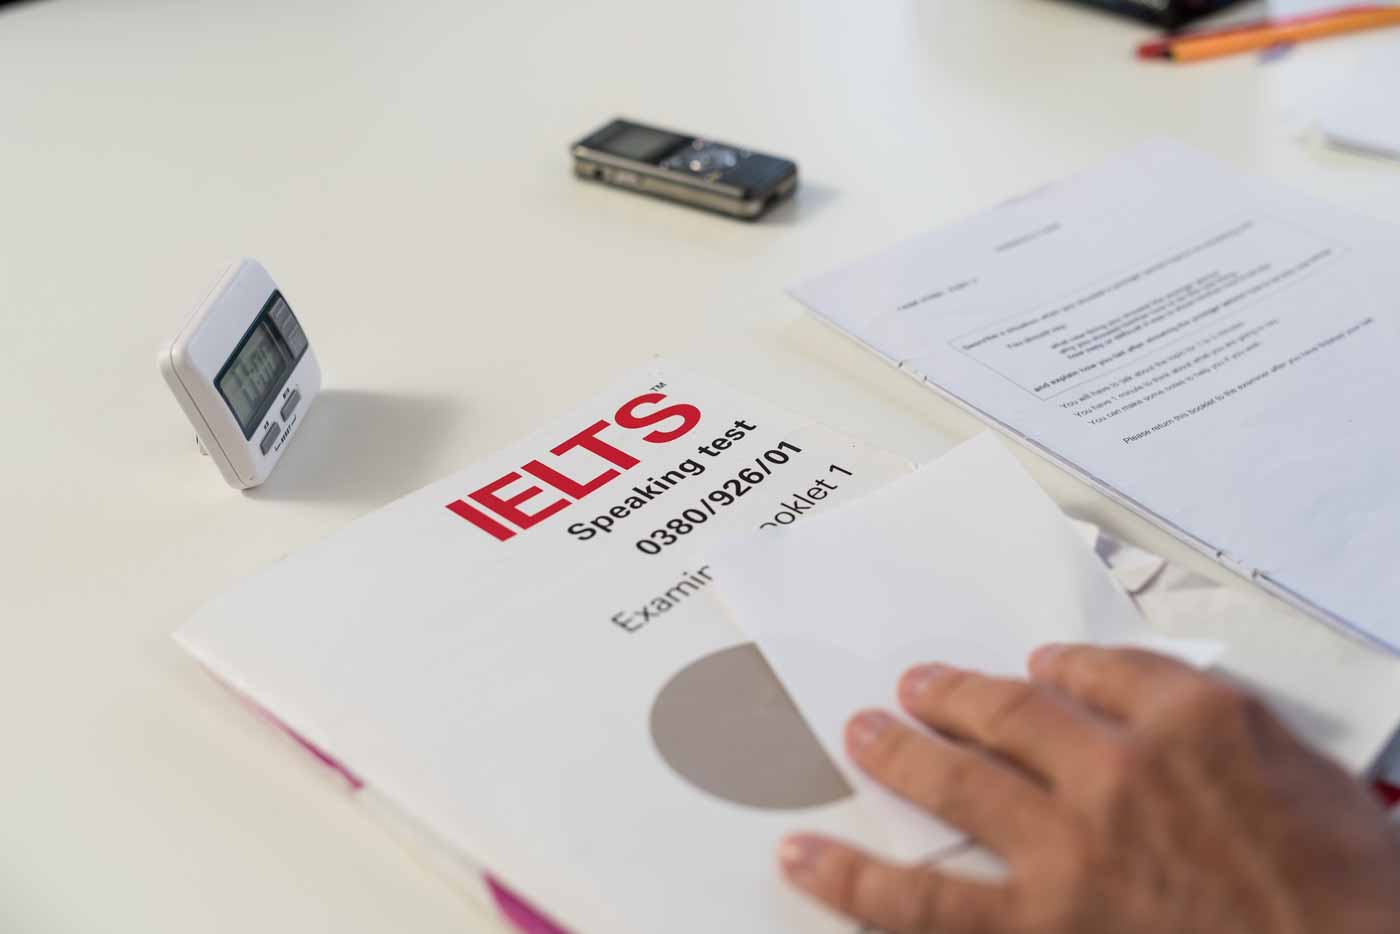 Tips to help you score high on your IELTS test